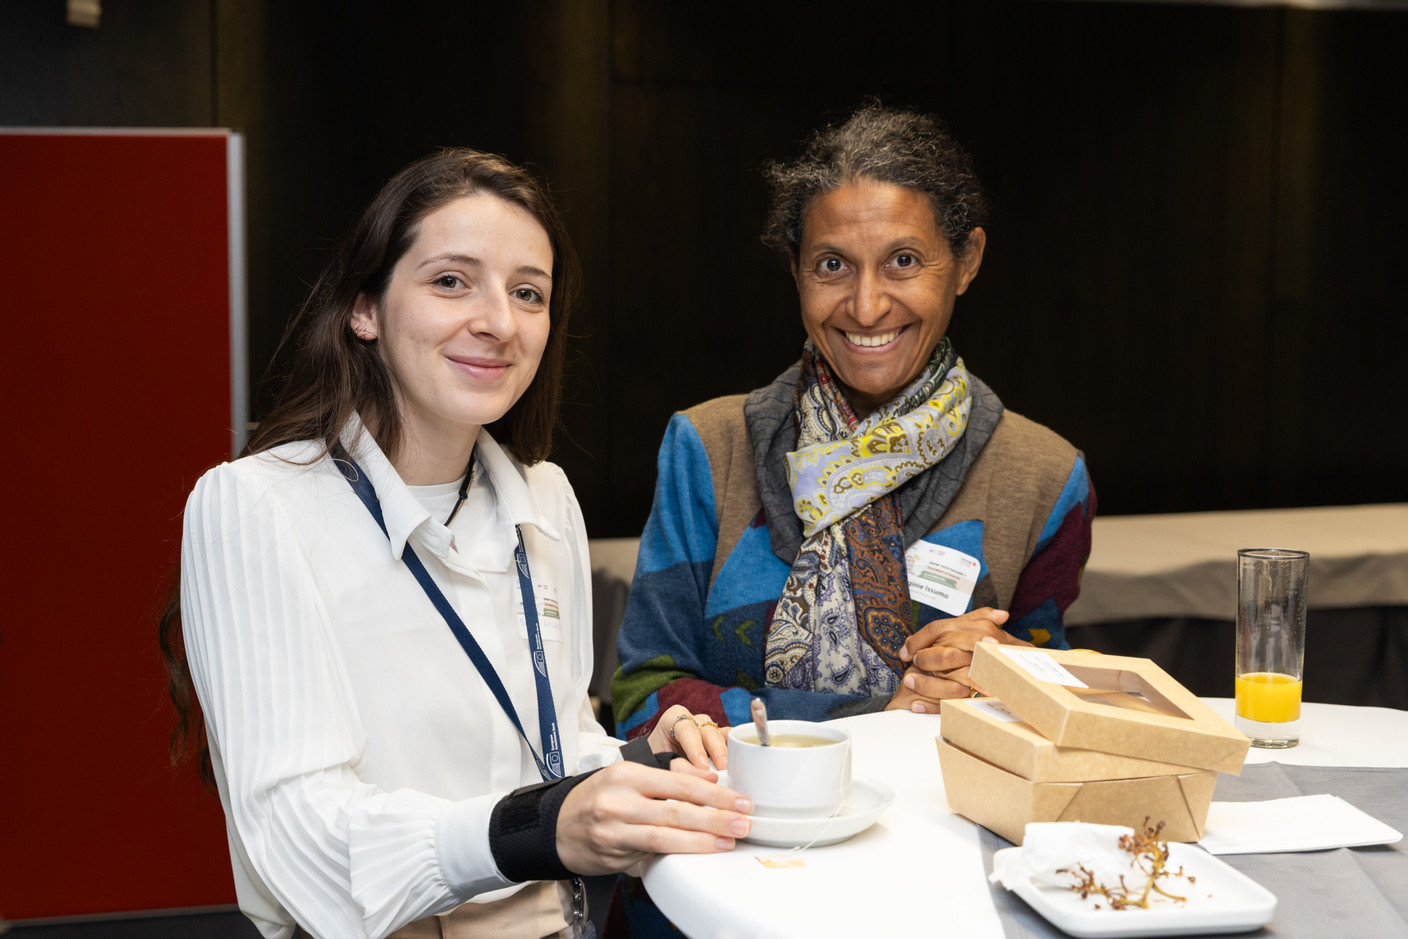 Virginie Issumo (right) during the networking event at the European Investment Bank headquarters in Luxembourg, 26 October 2023. Photo: Romain Gamba / Maison Moderne